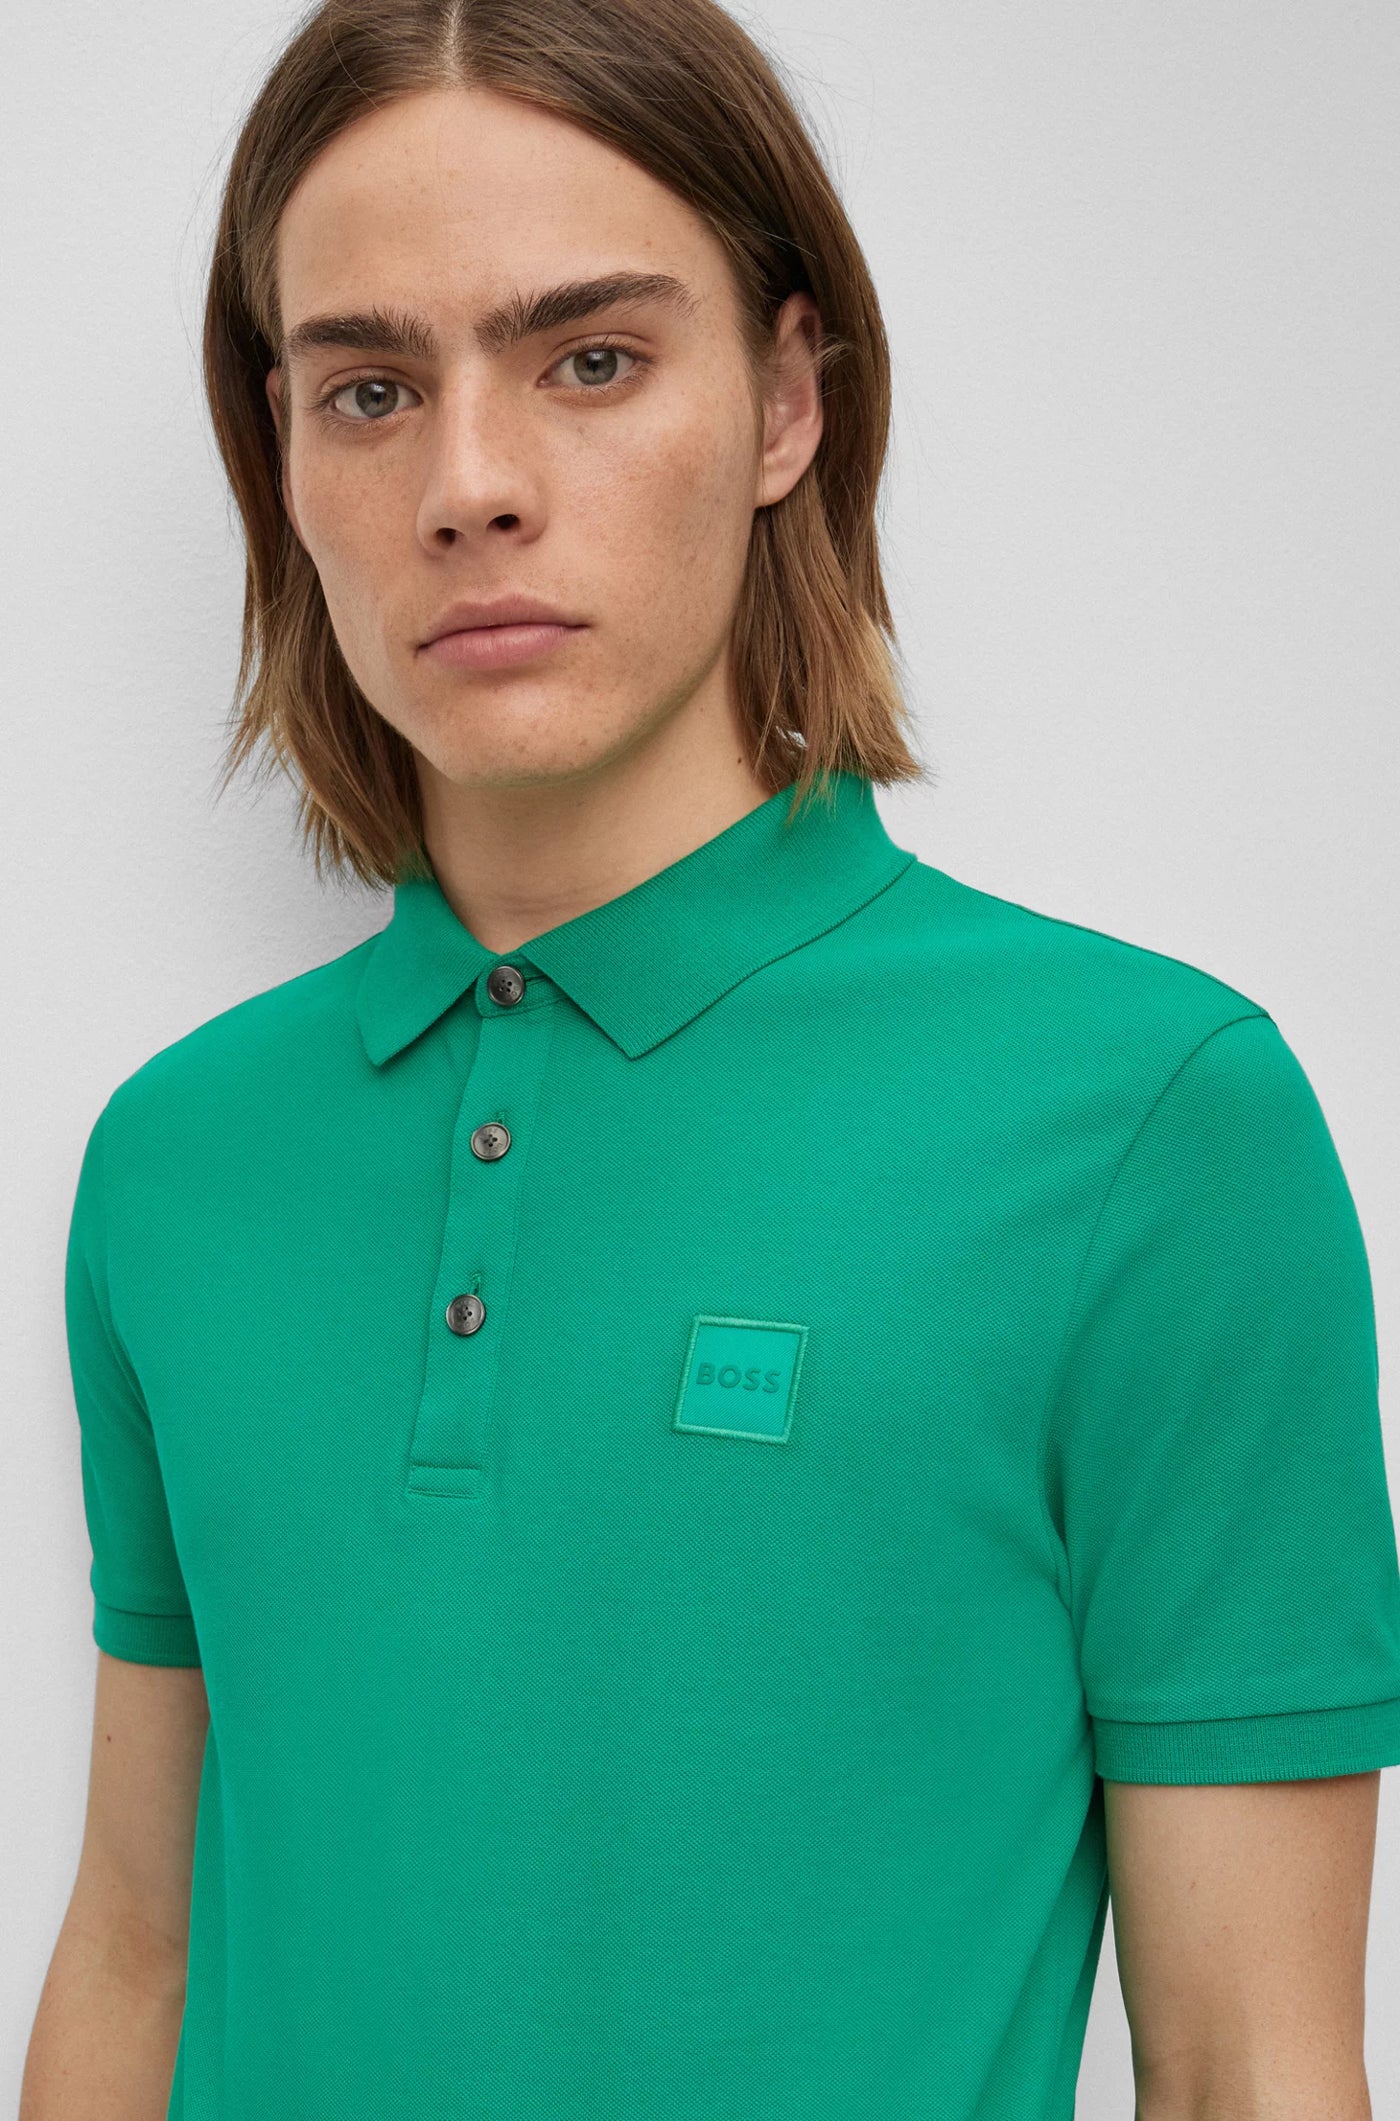 Passenger Polo in Teal